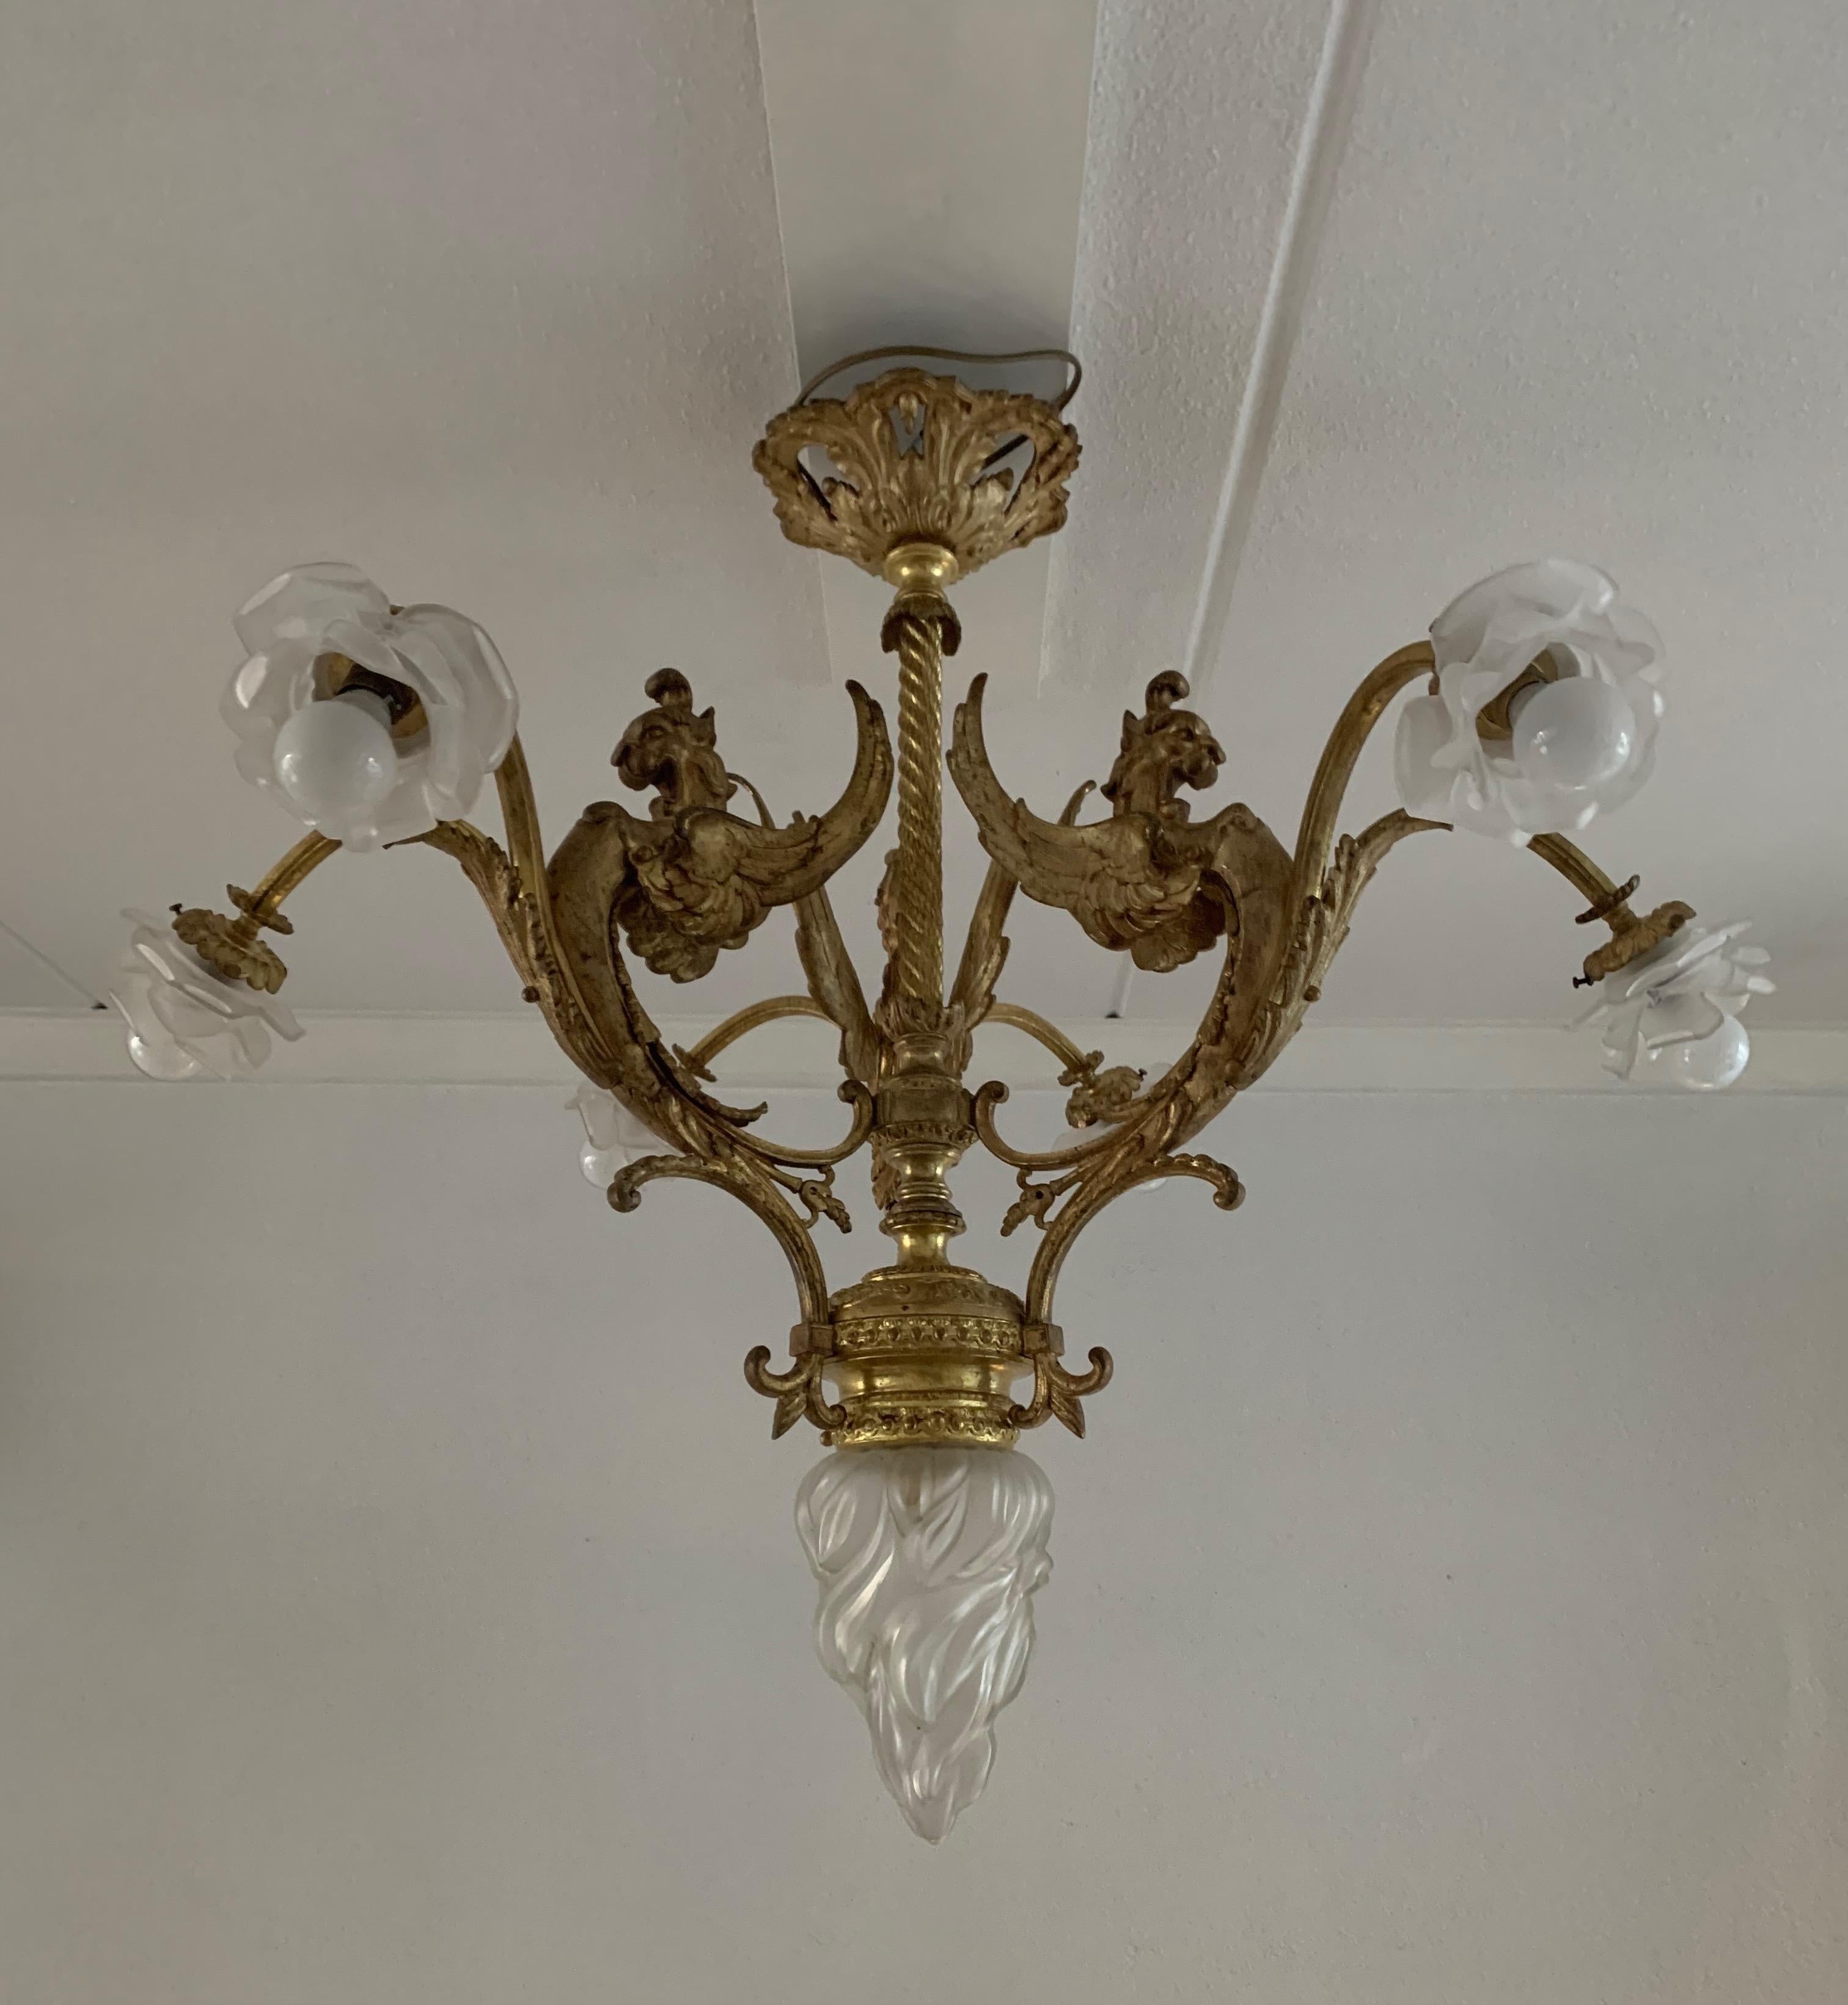 Stunning and sizable, one of a kind light fixture from the late 1800s.

If you appreciate the history and beauty of the French Gothic style then this amazing light fixture could be perfect for you. When we first saw this work of lighting art, we